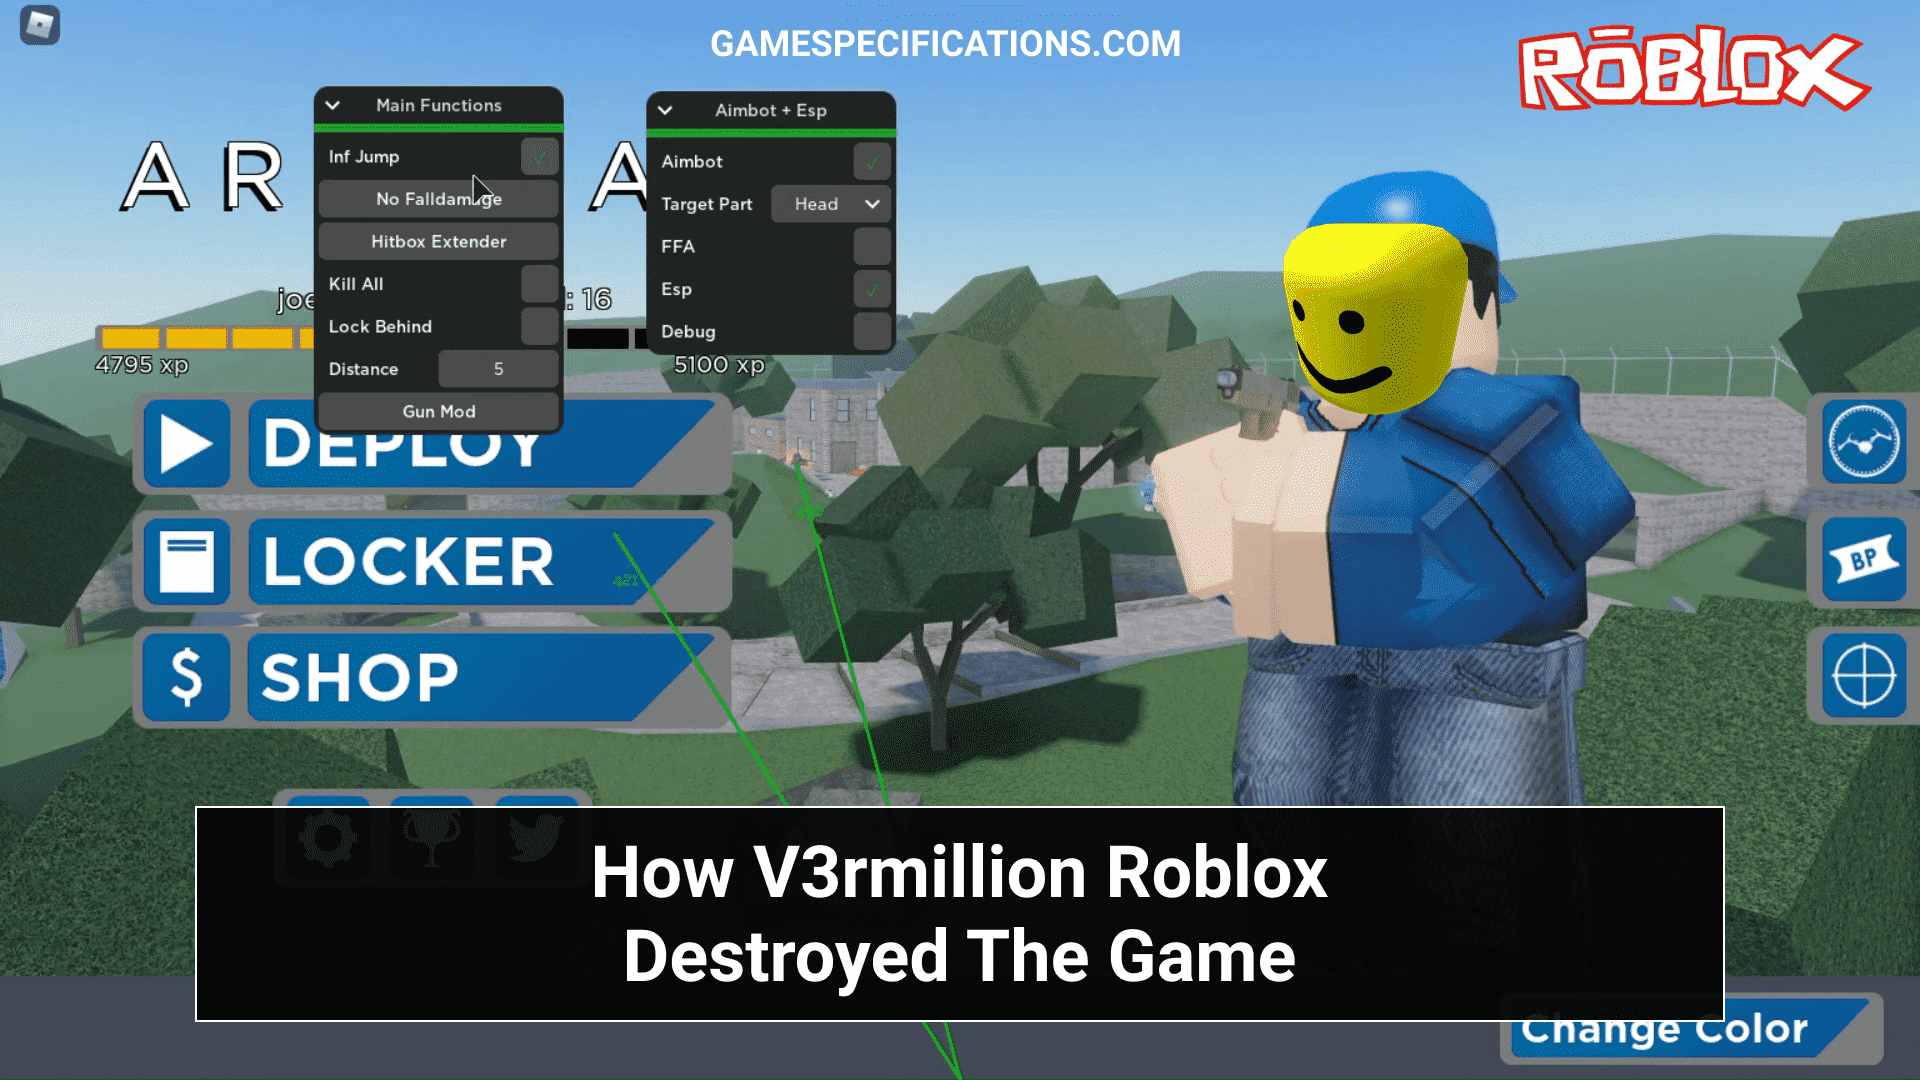 V3rmillion Roblox Breaked The Game By Using Powerful Exploits And Scripts Game Specifications - roblox dll esp